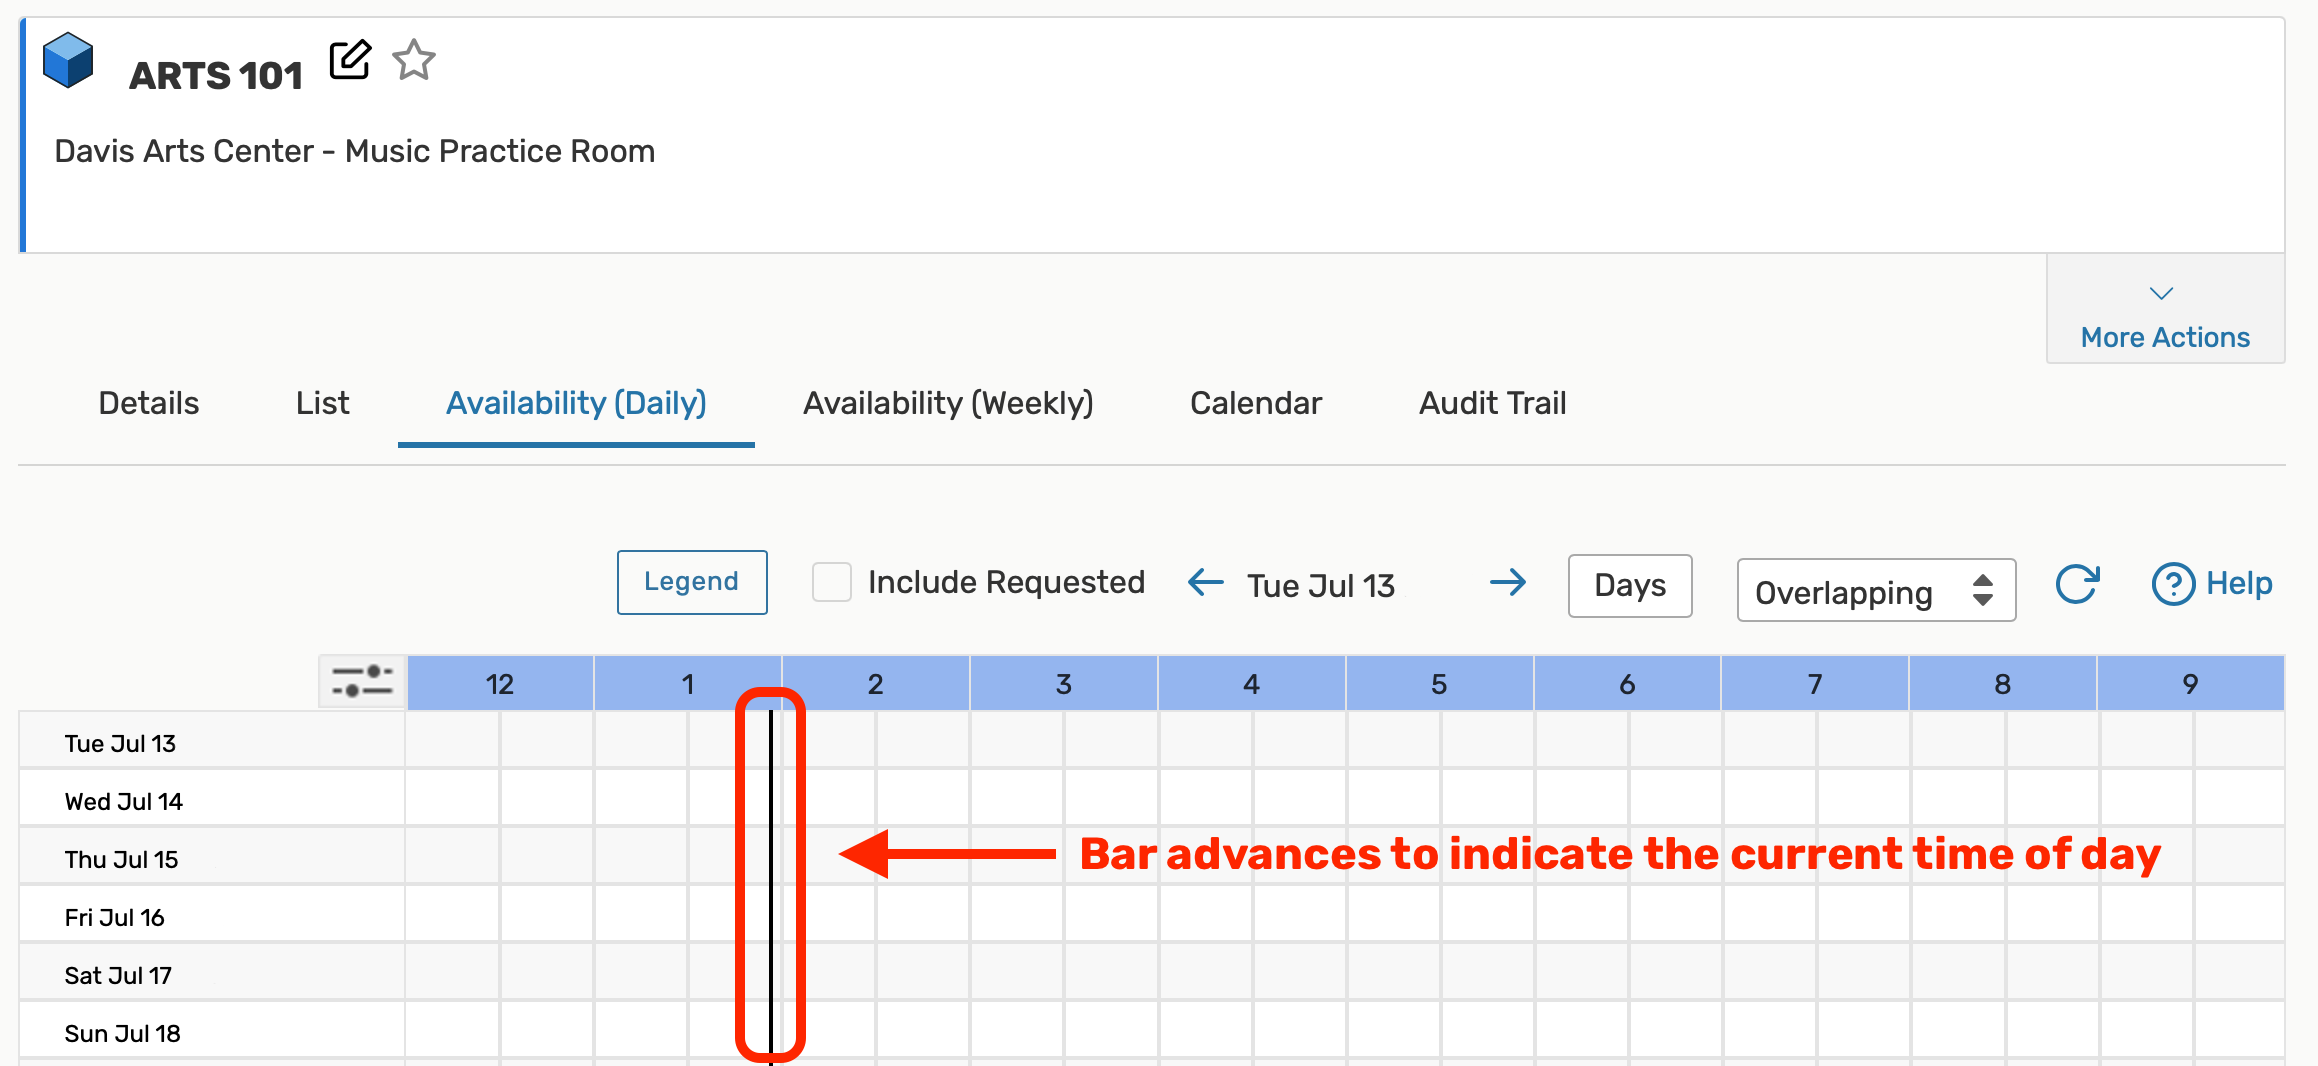 The bar on the availability calendar advances to indicate the current time of day